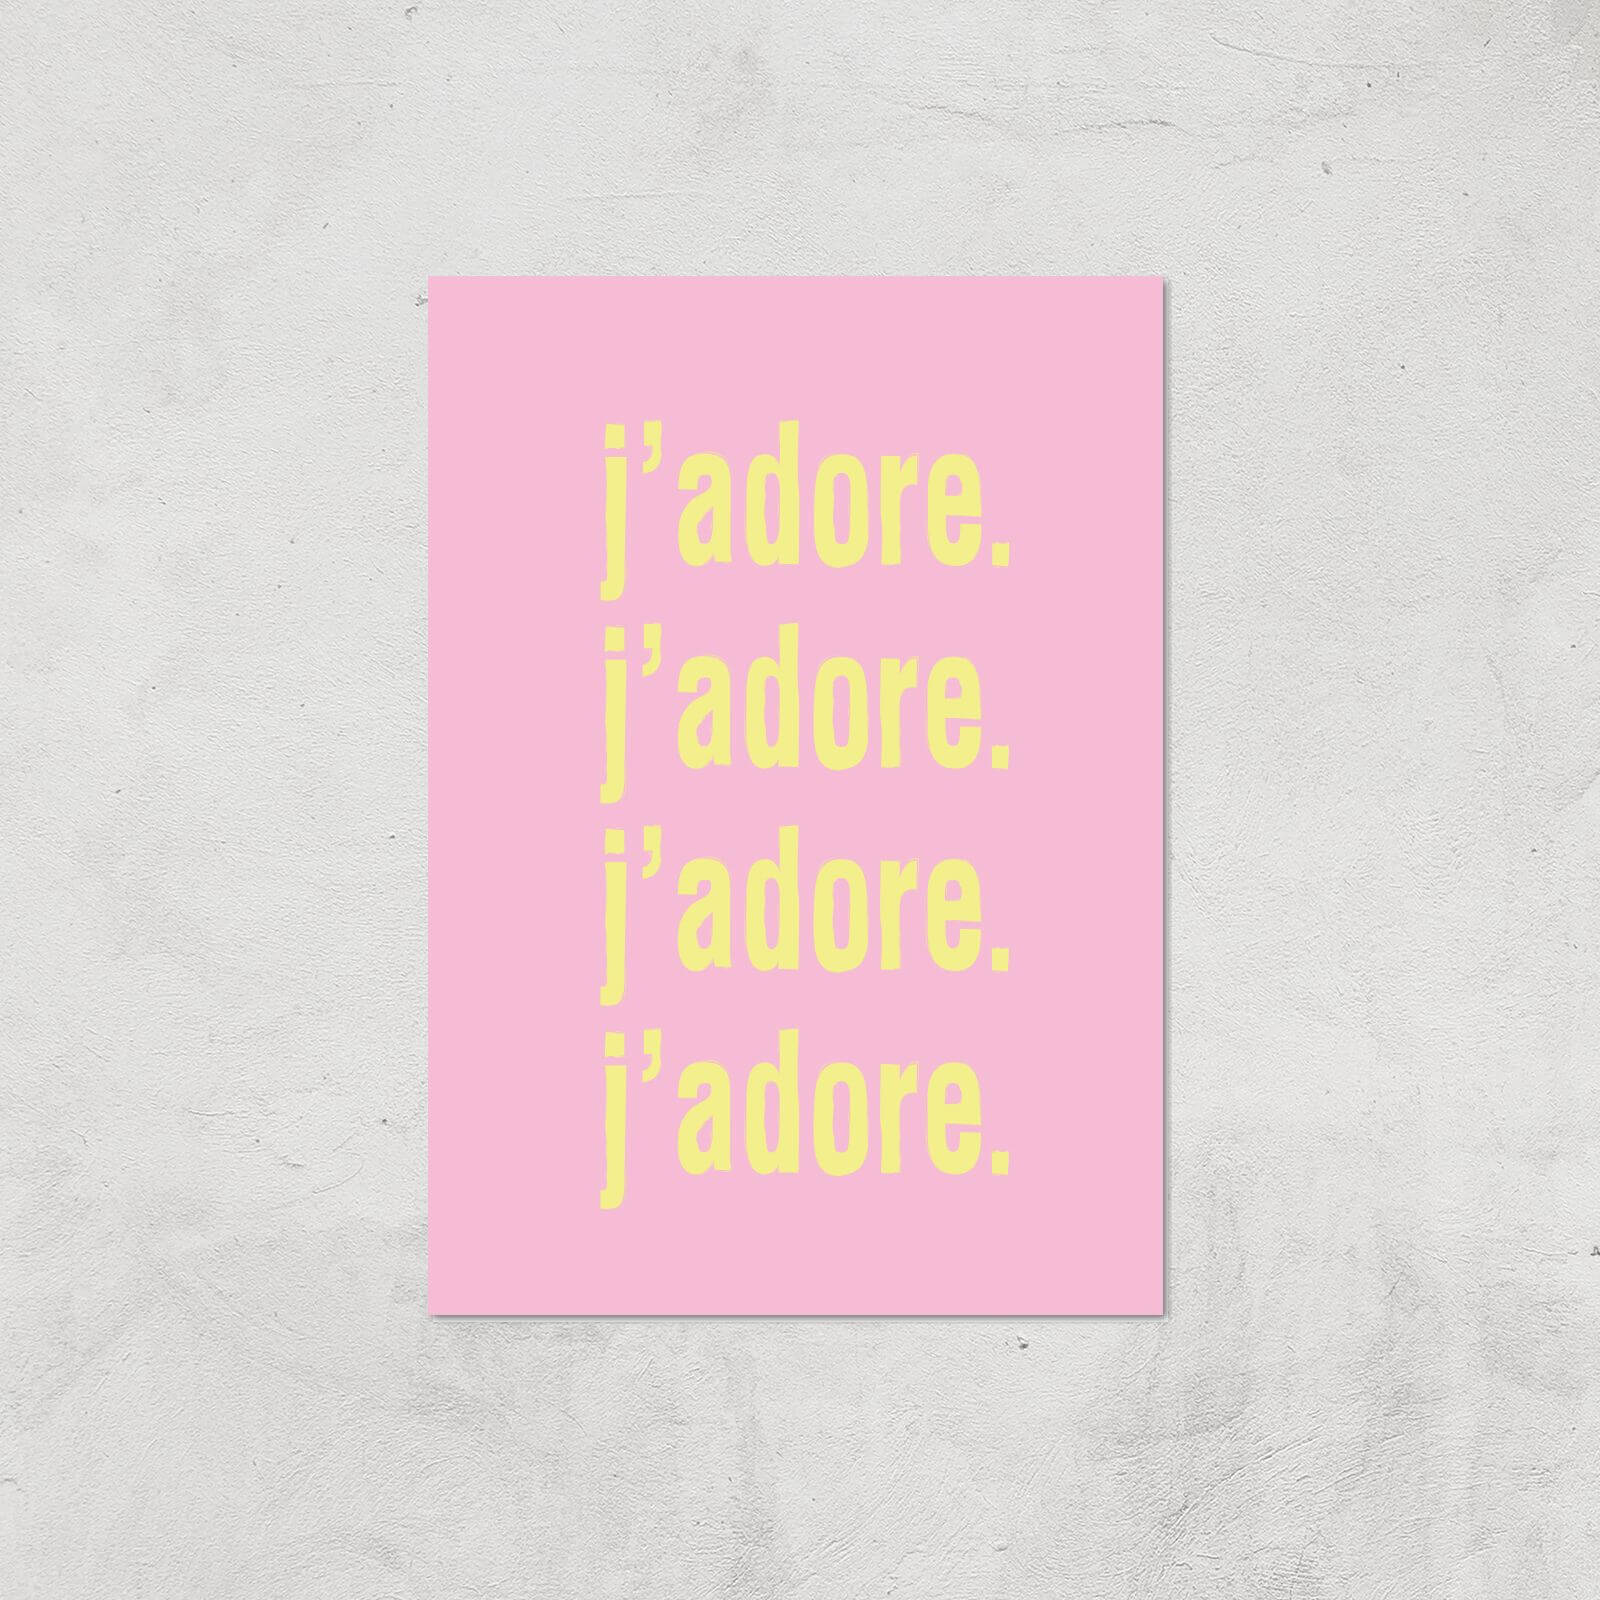 J'adore J'adore J'adore J'adore Giclee Art Print - A3 - Print Only